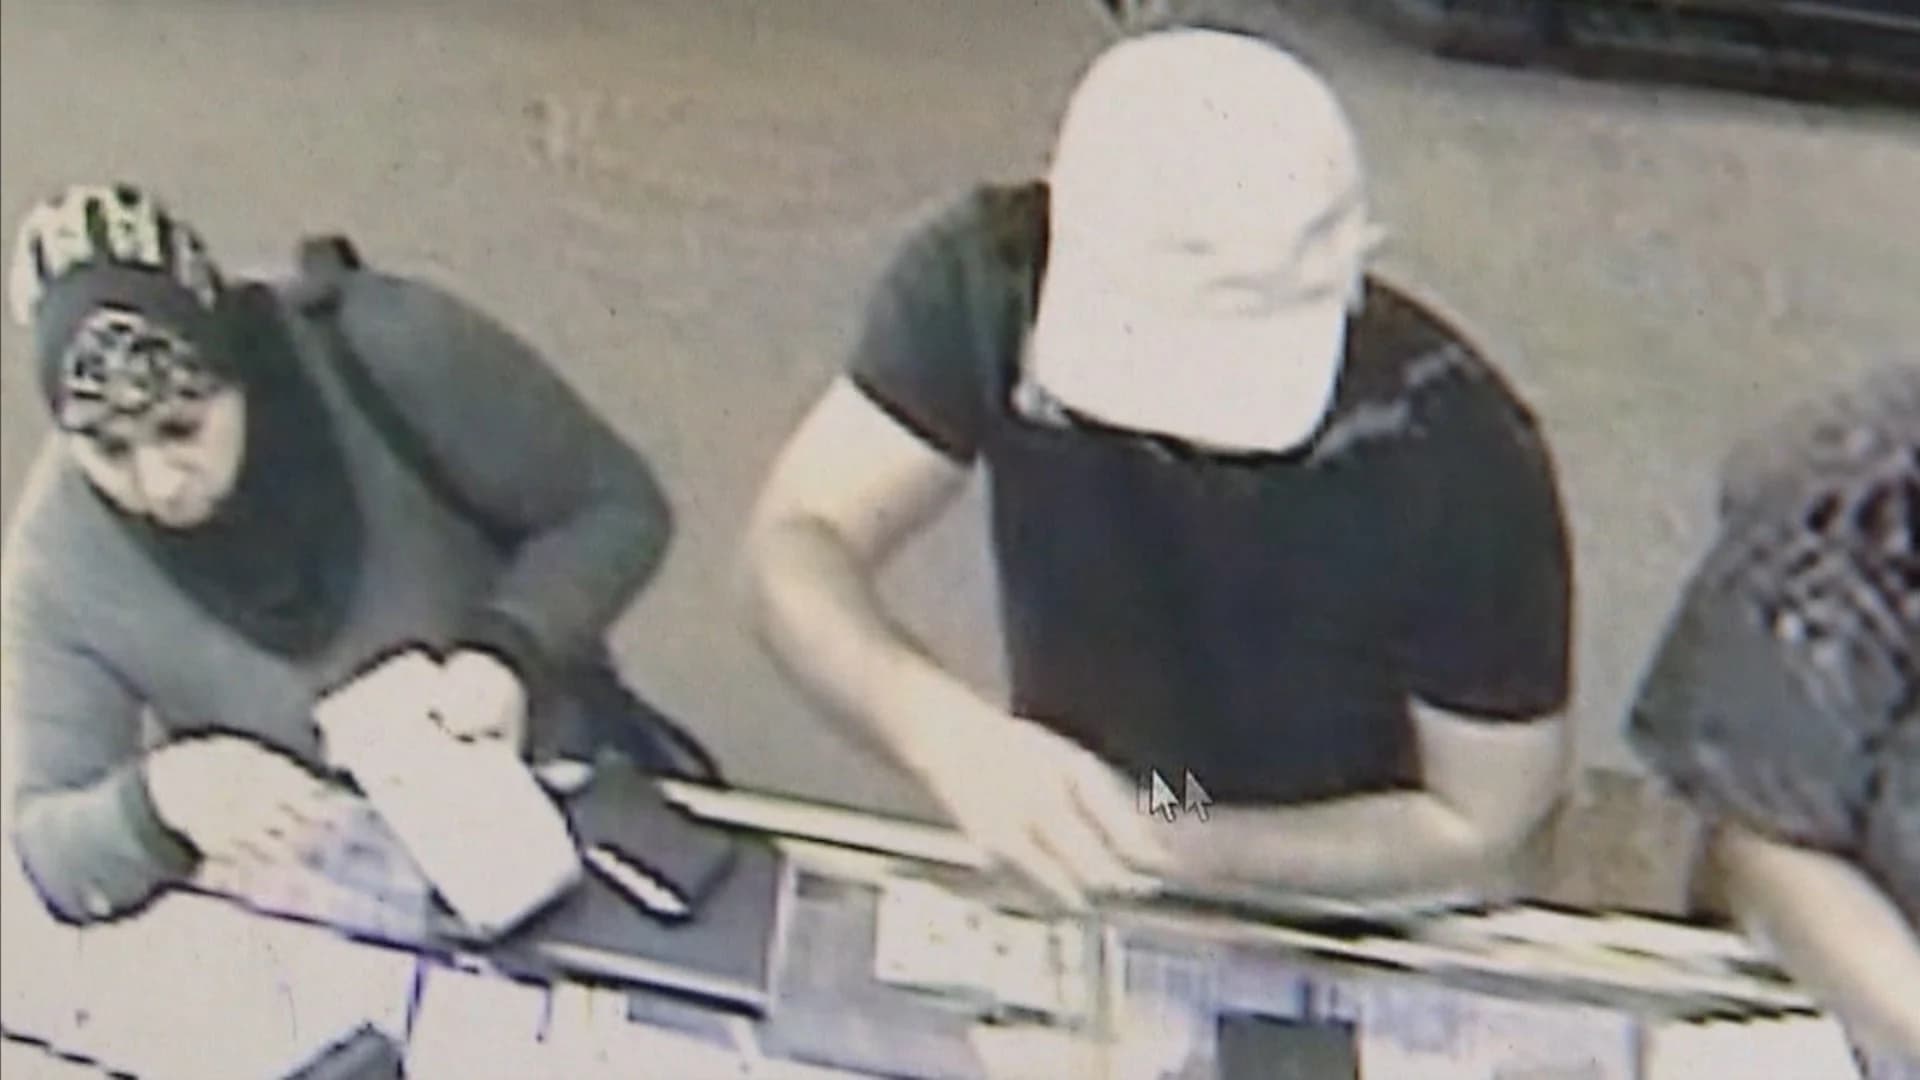 Sleight-of-hand thieves steal $10K worth of jewelry from Union Township store